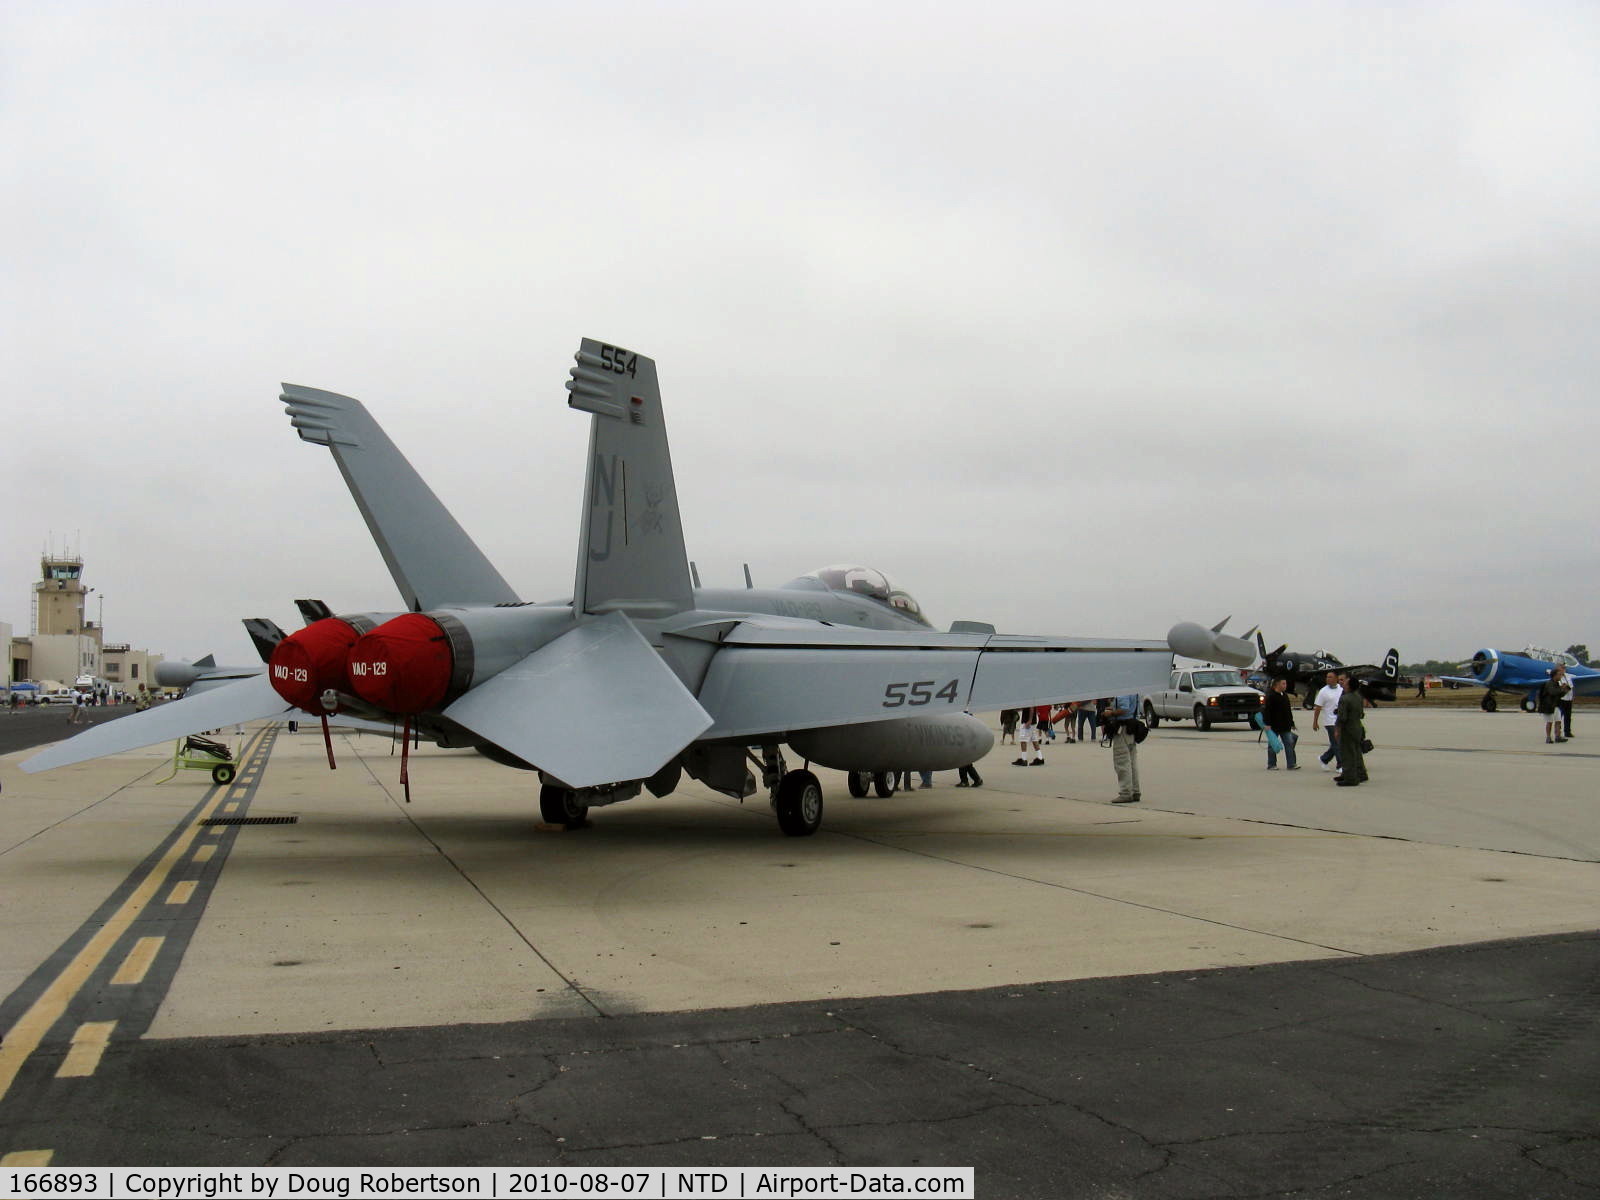 166893, Boeing EA-18G Growler C/N G-5, Boeing EA-18G GROWLER Electronic Countermeasures aircrqft of VX-30 VIKINGS, to replace Grumman EA-6B PROWLER. Note multiple jamming antennas on canted tailfins.